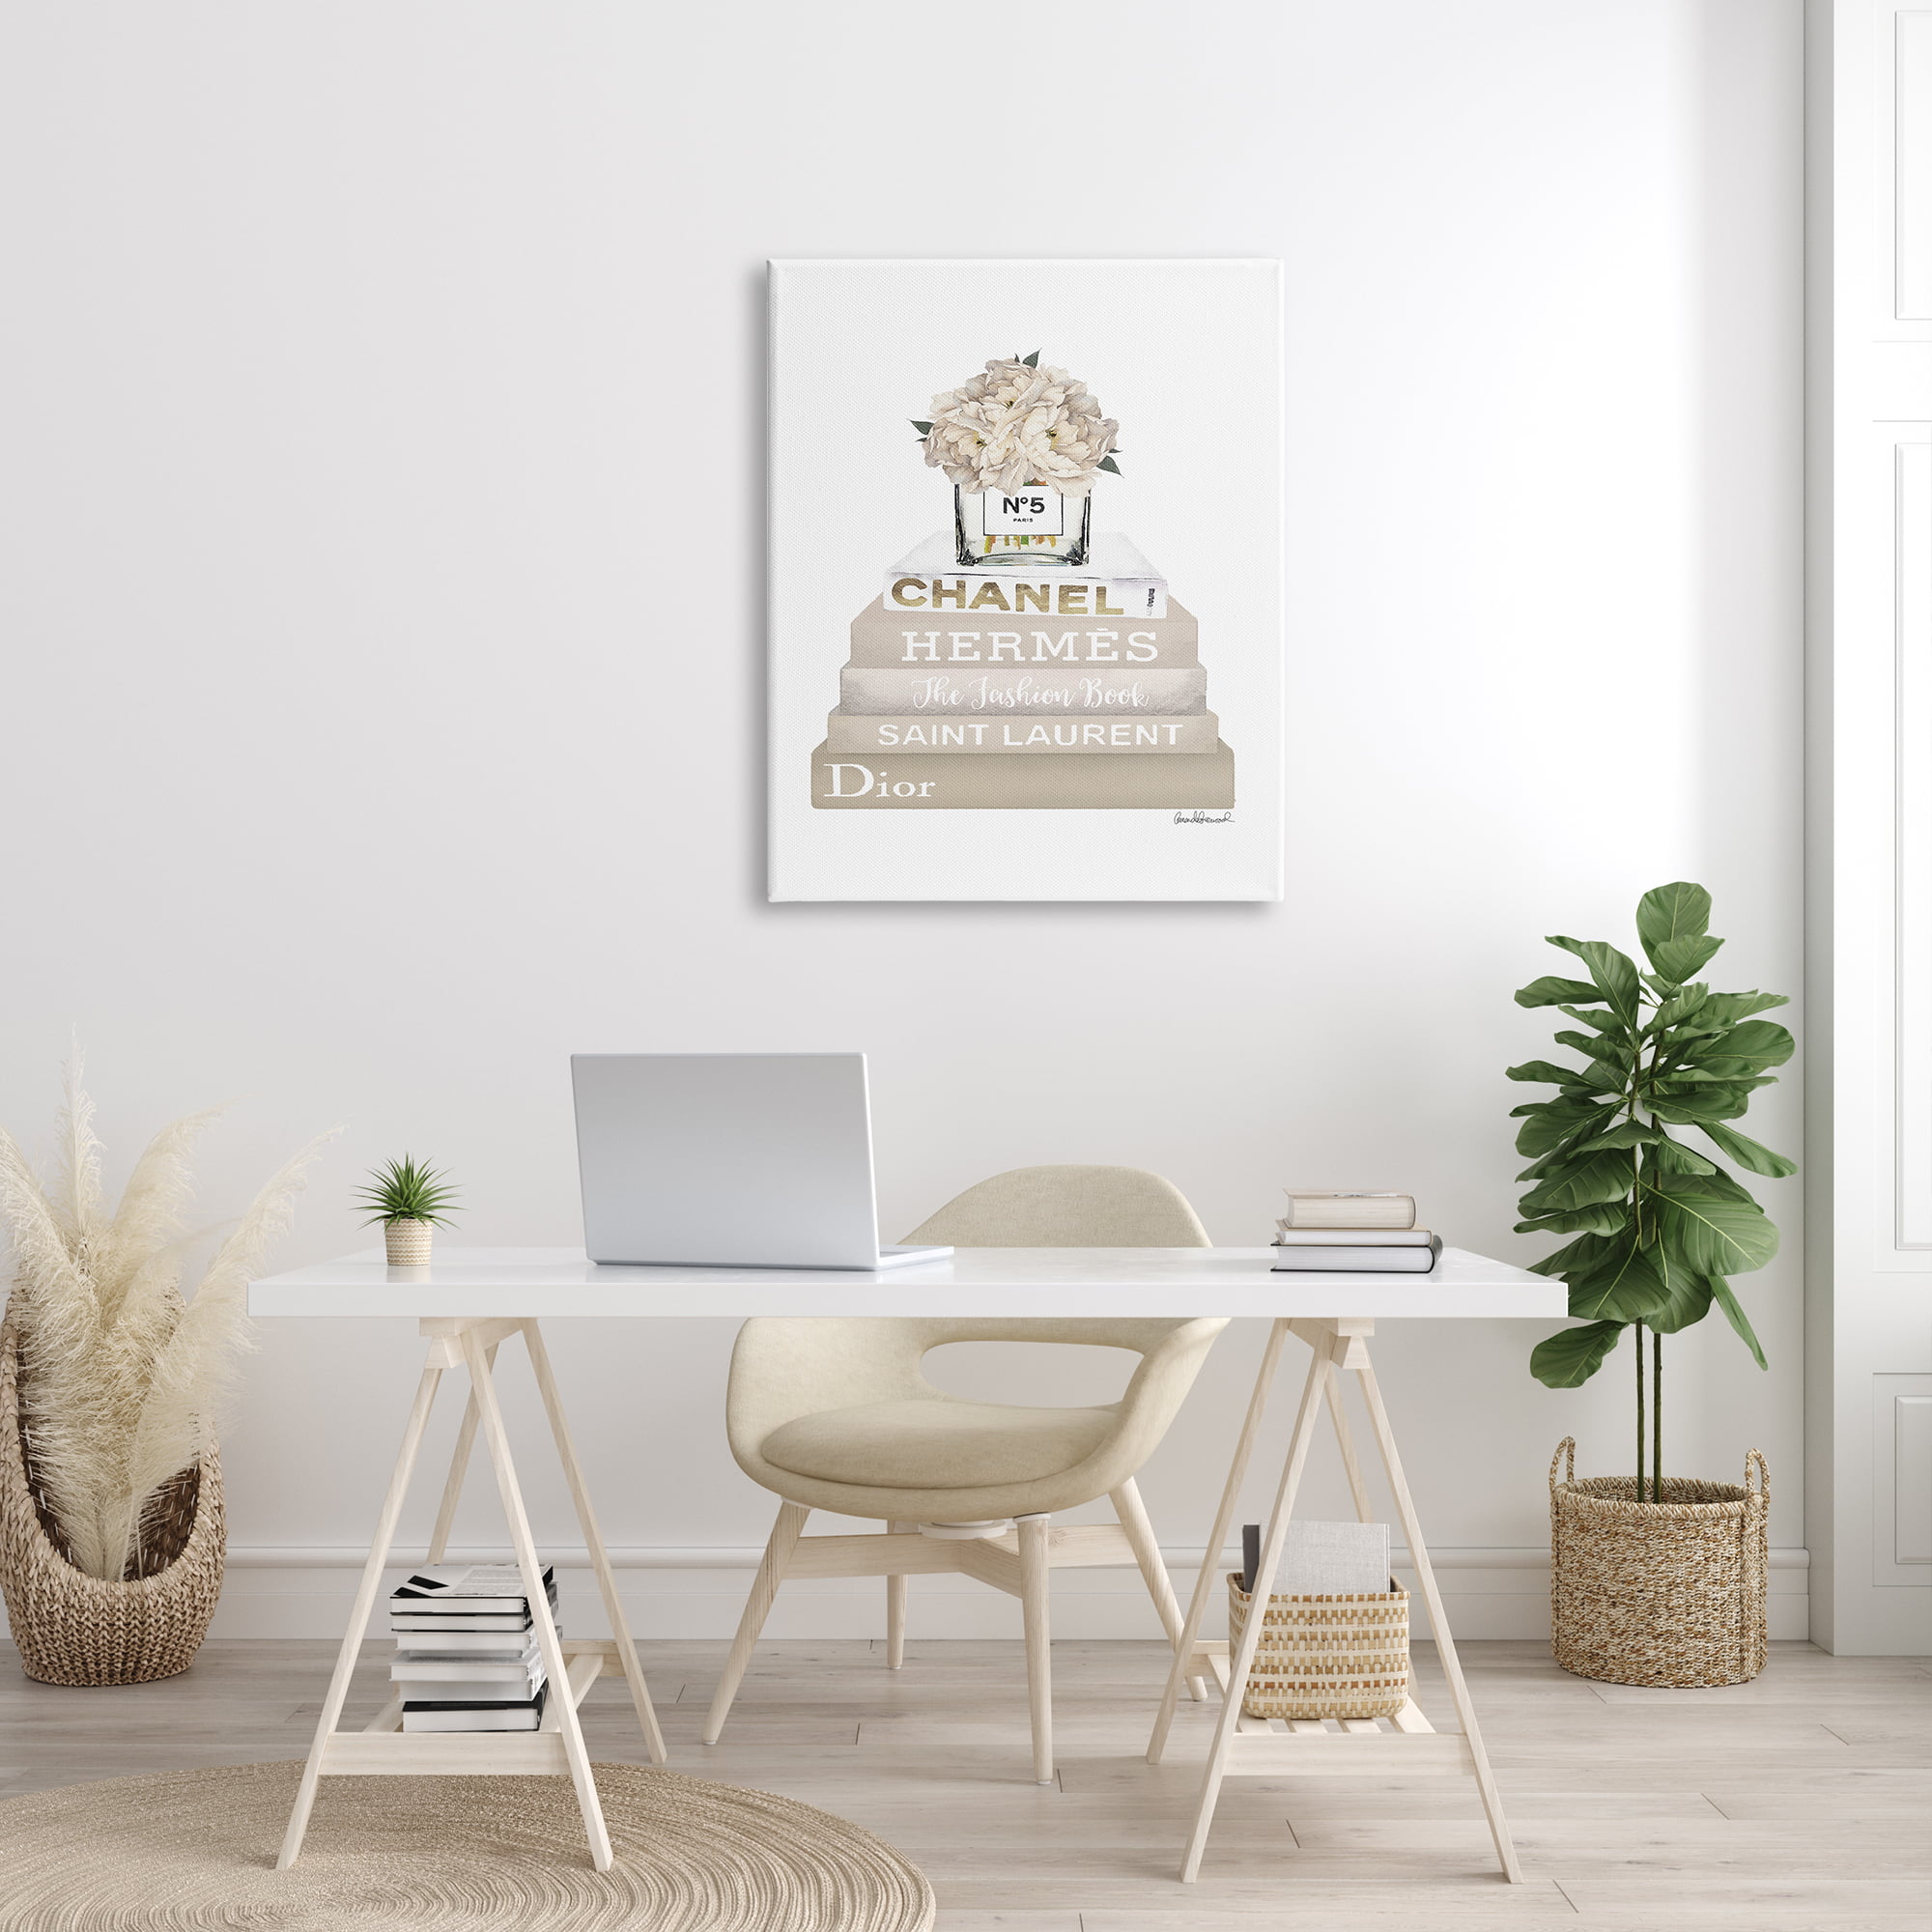 Bookstack Metallic Silver' Graphic Art Print on Canvas East Urban Home Size: 26 H x 18 W x 1.5 D